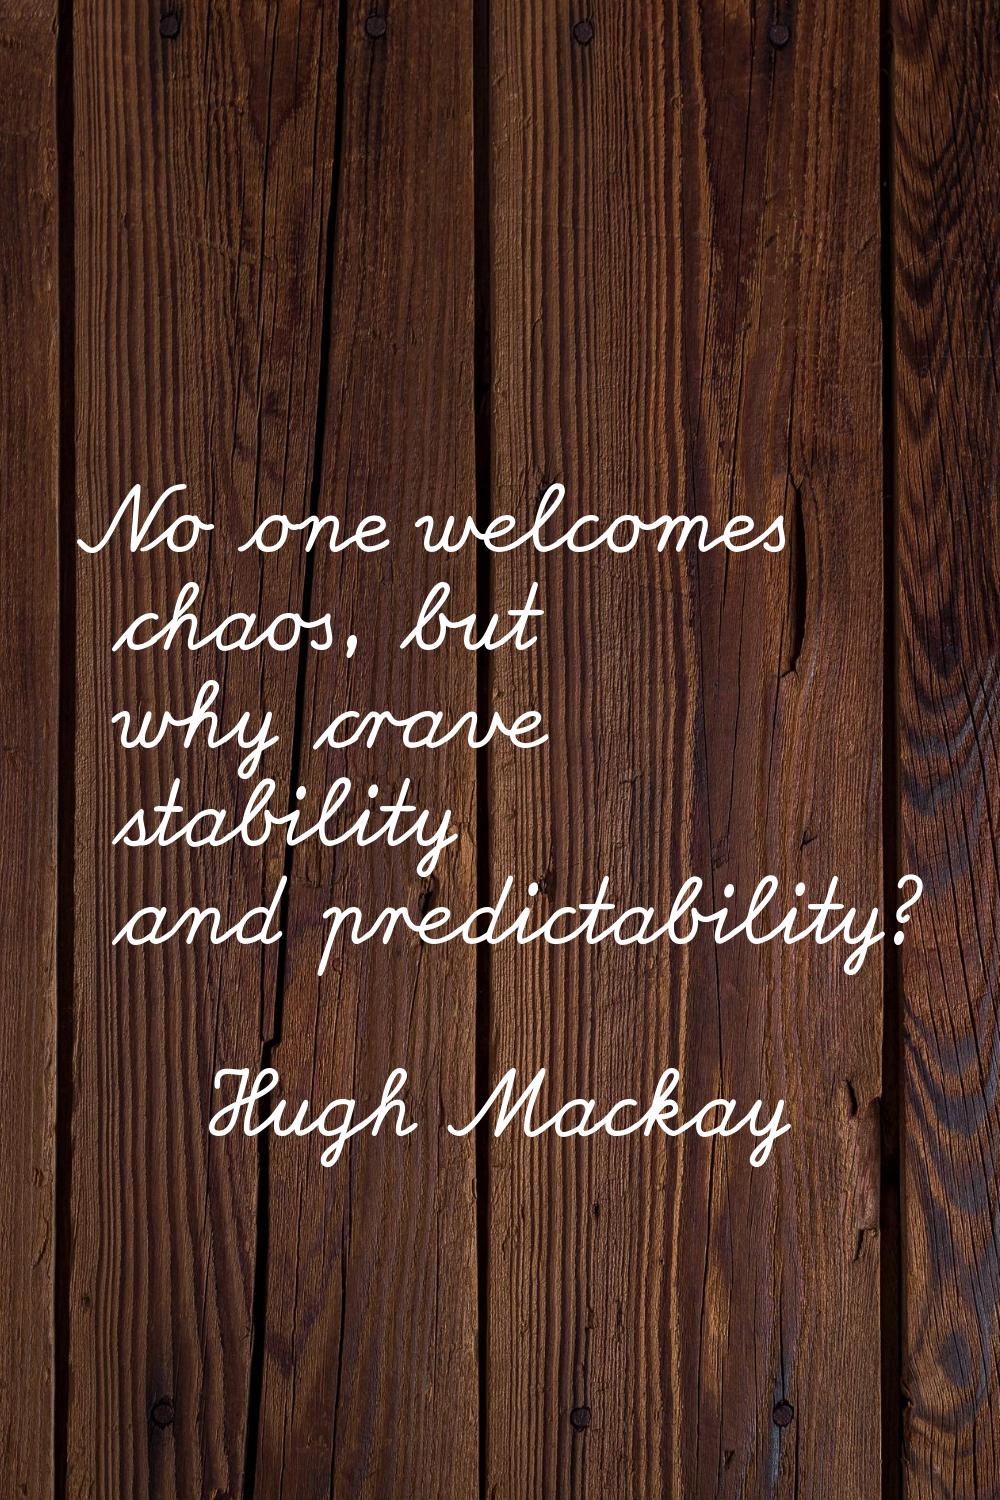 No one welcomes chaos, but why crave stability and predictability?